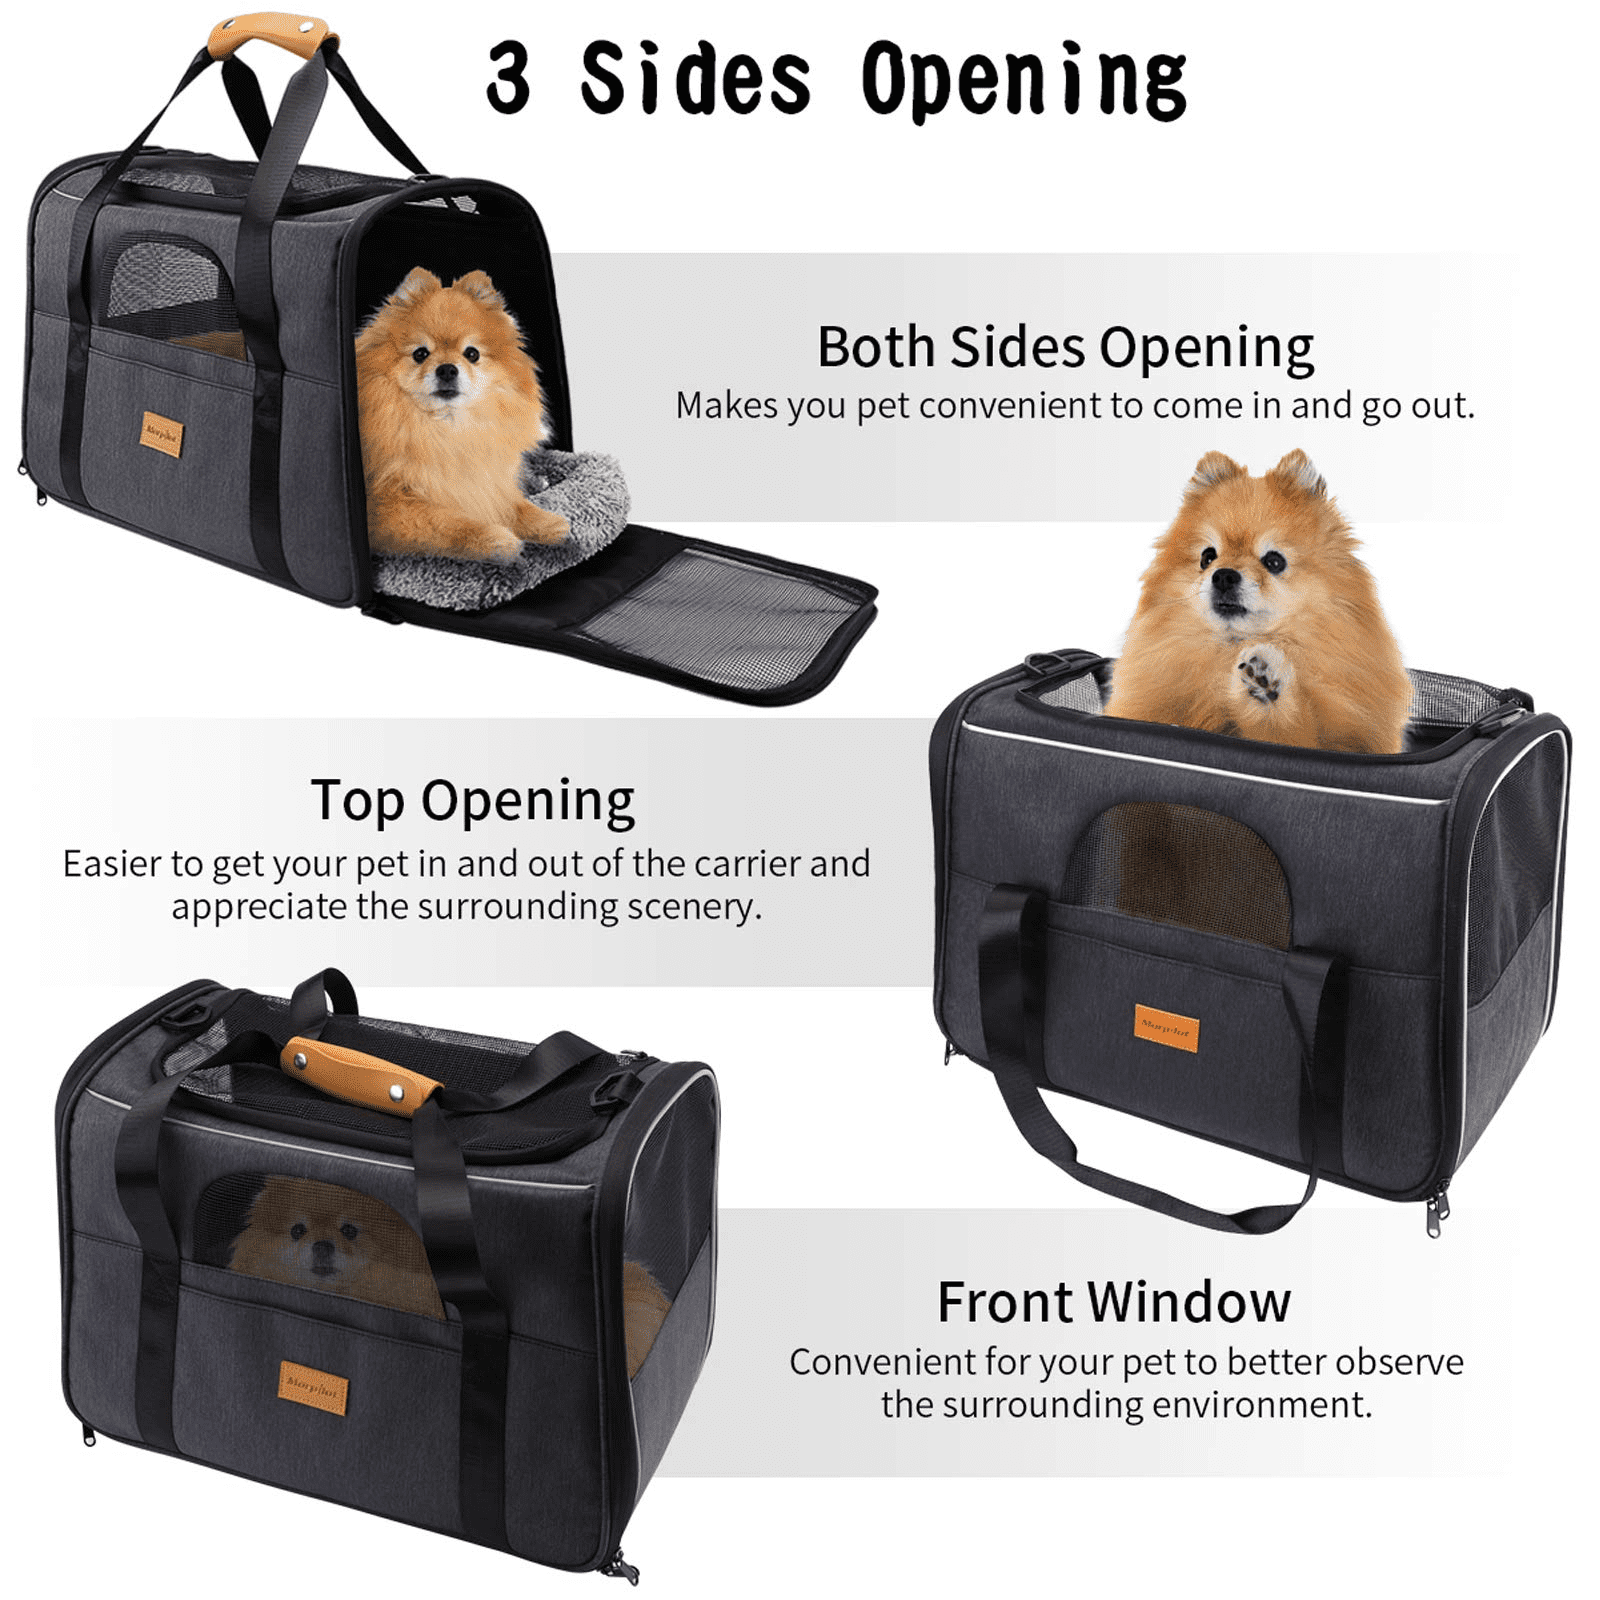 morpilot Pet Travel Carrier Bag, Soft-Sided Dog Carrier Cat Carrier Pet  Carrier (18 x 12.5 x 14 Inches), for Large Cats and Medium Puppies,  w/Locking